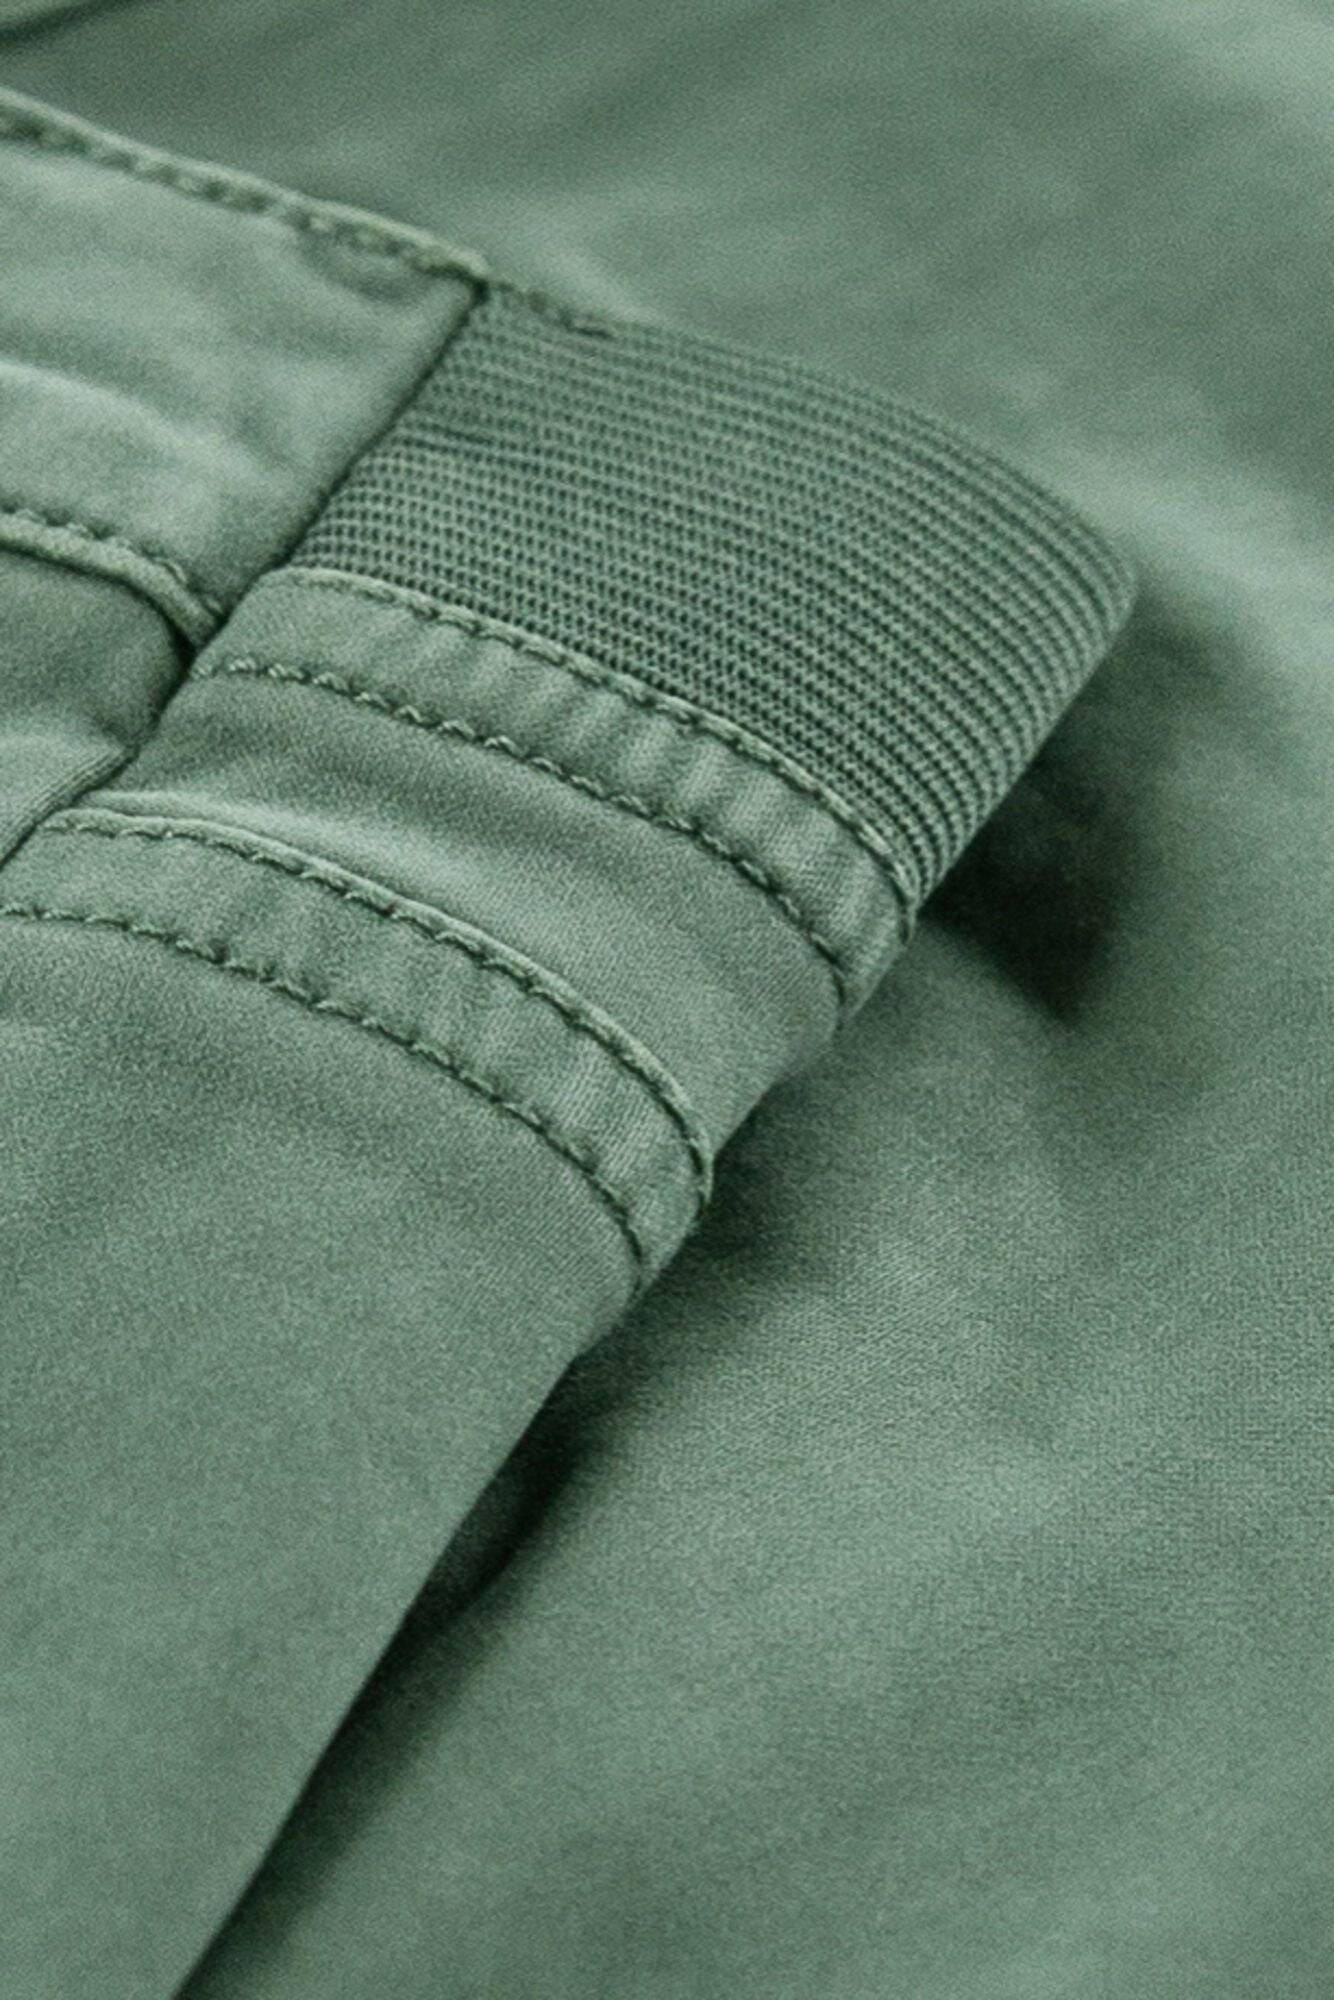 Garcia Army Green Trousers - Your Style Your Story